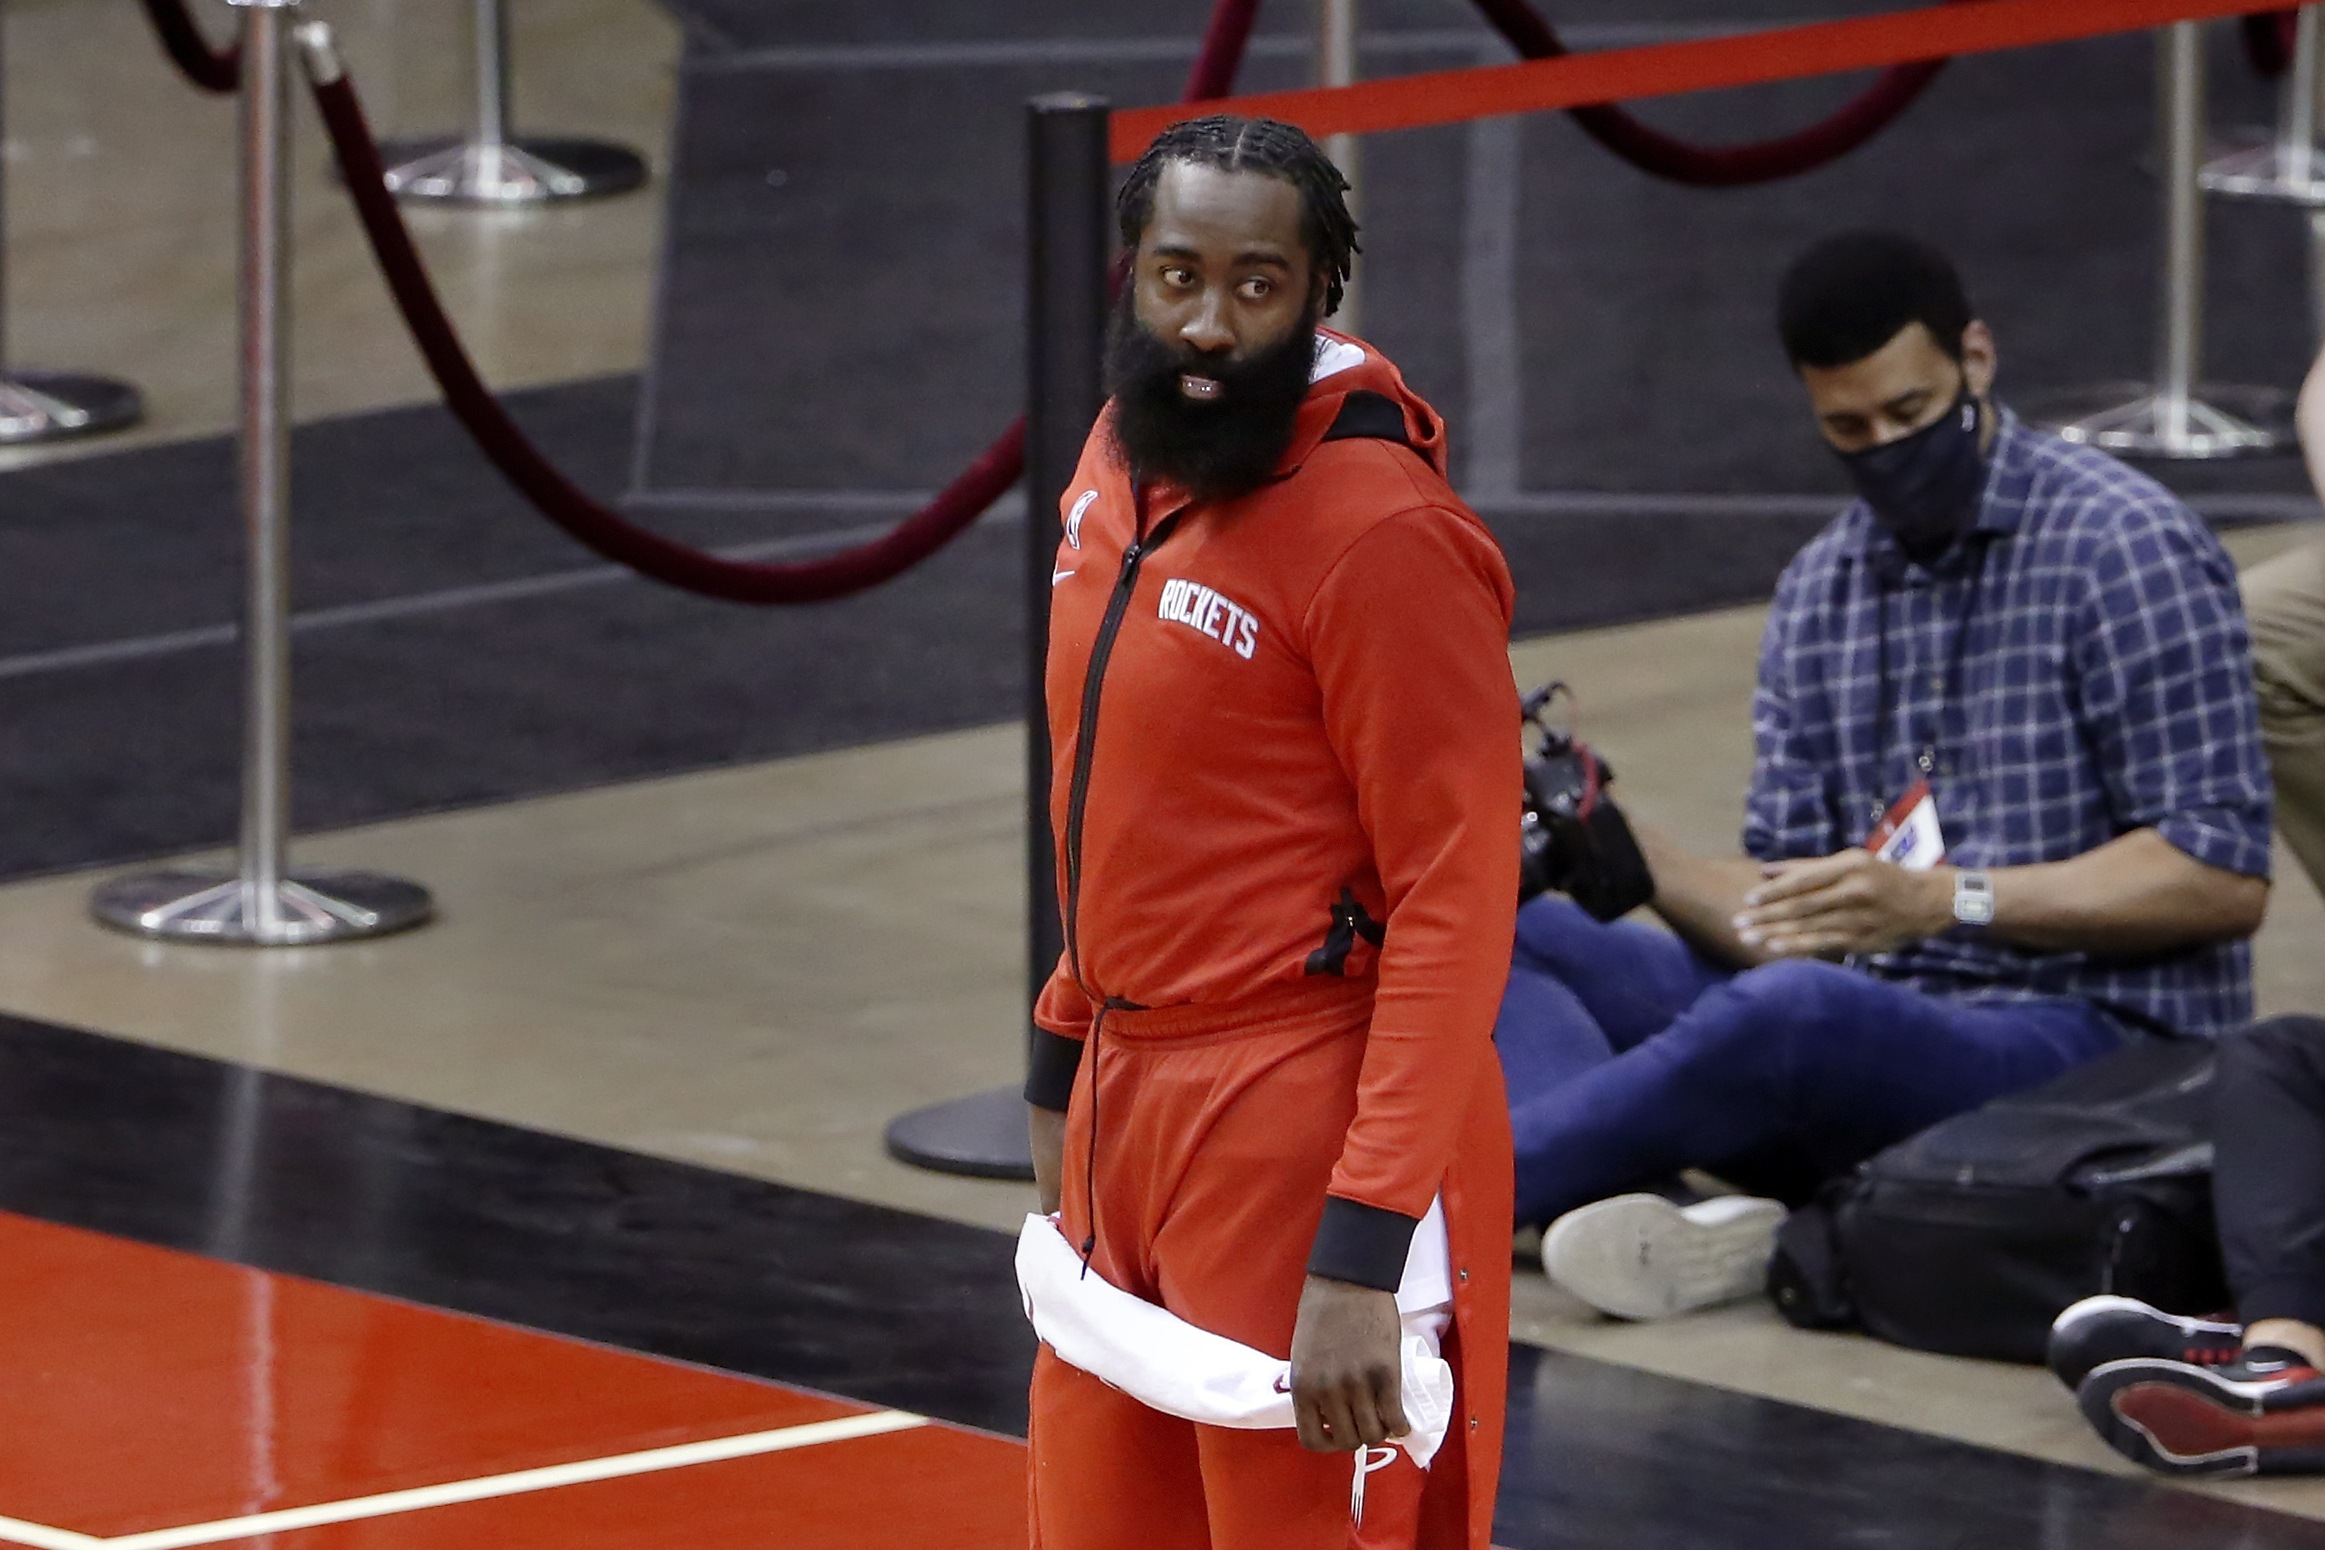 MacMahon: Rockets realize James Harden likely gone, want to weigh